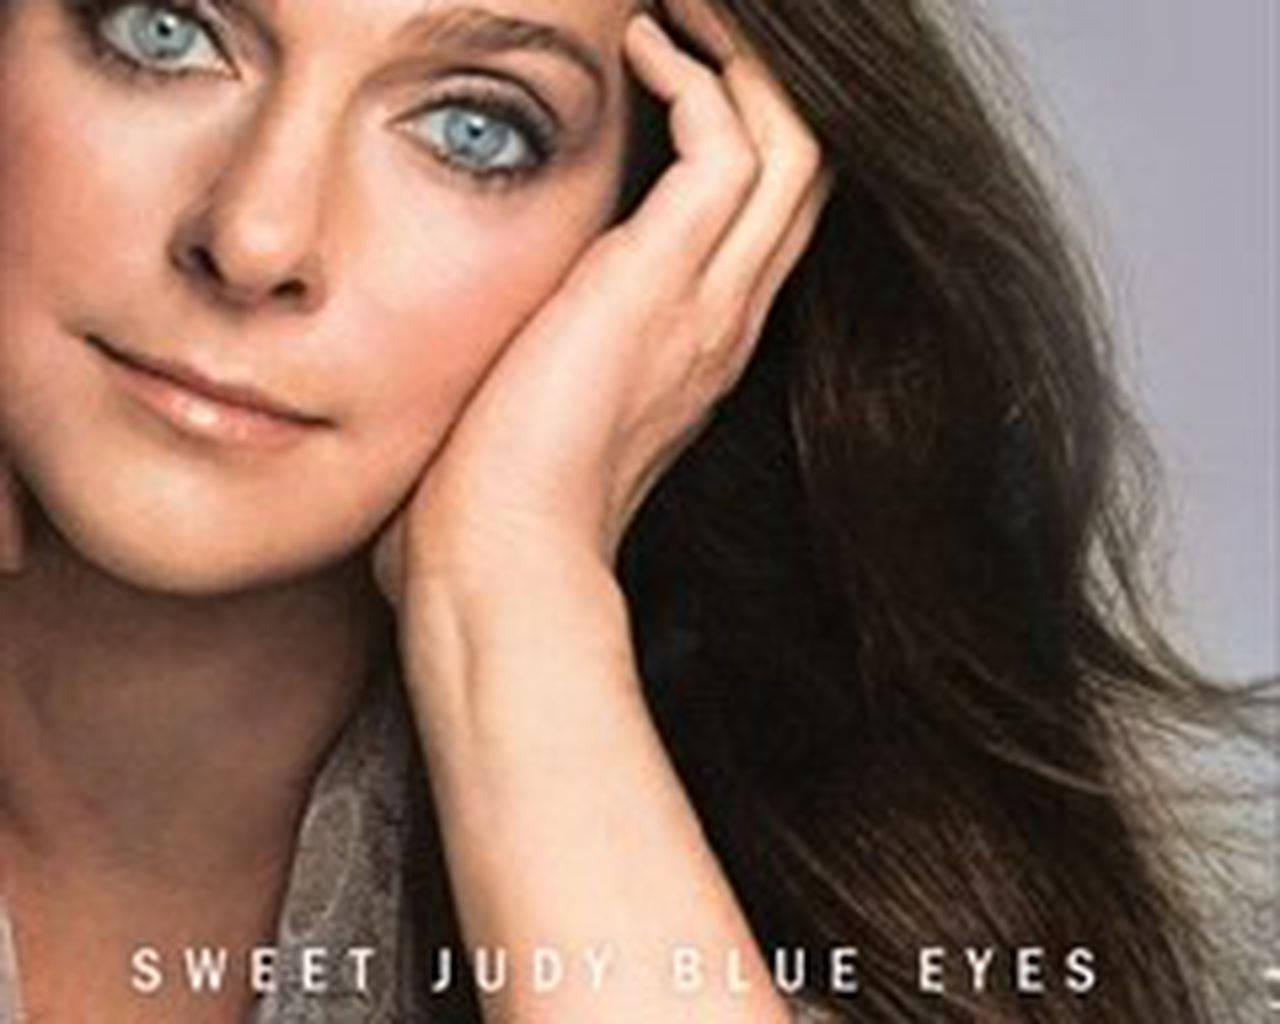 Sweet Judy Blue Eyes My Life In Music By Judy Collins Wallpaper